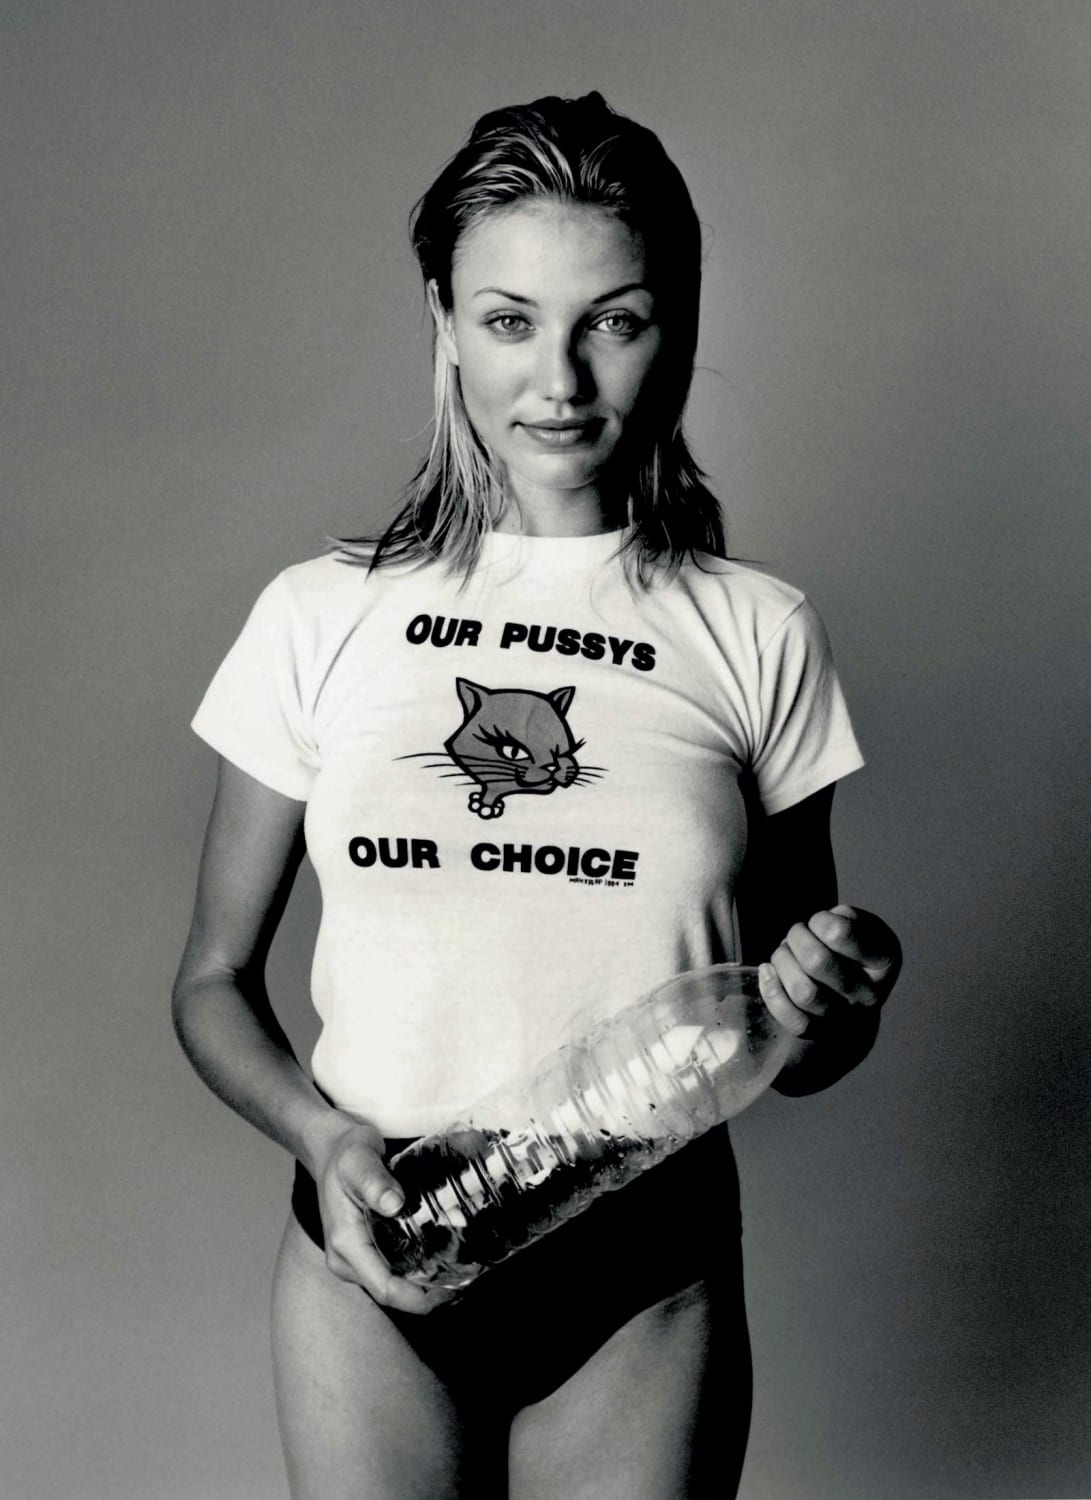 Cameron Diaz in a progressive shirt for the times, 1990s.